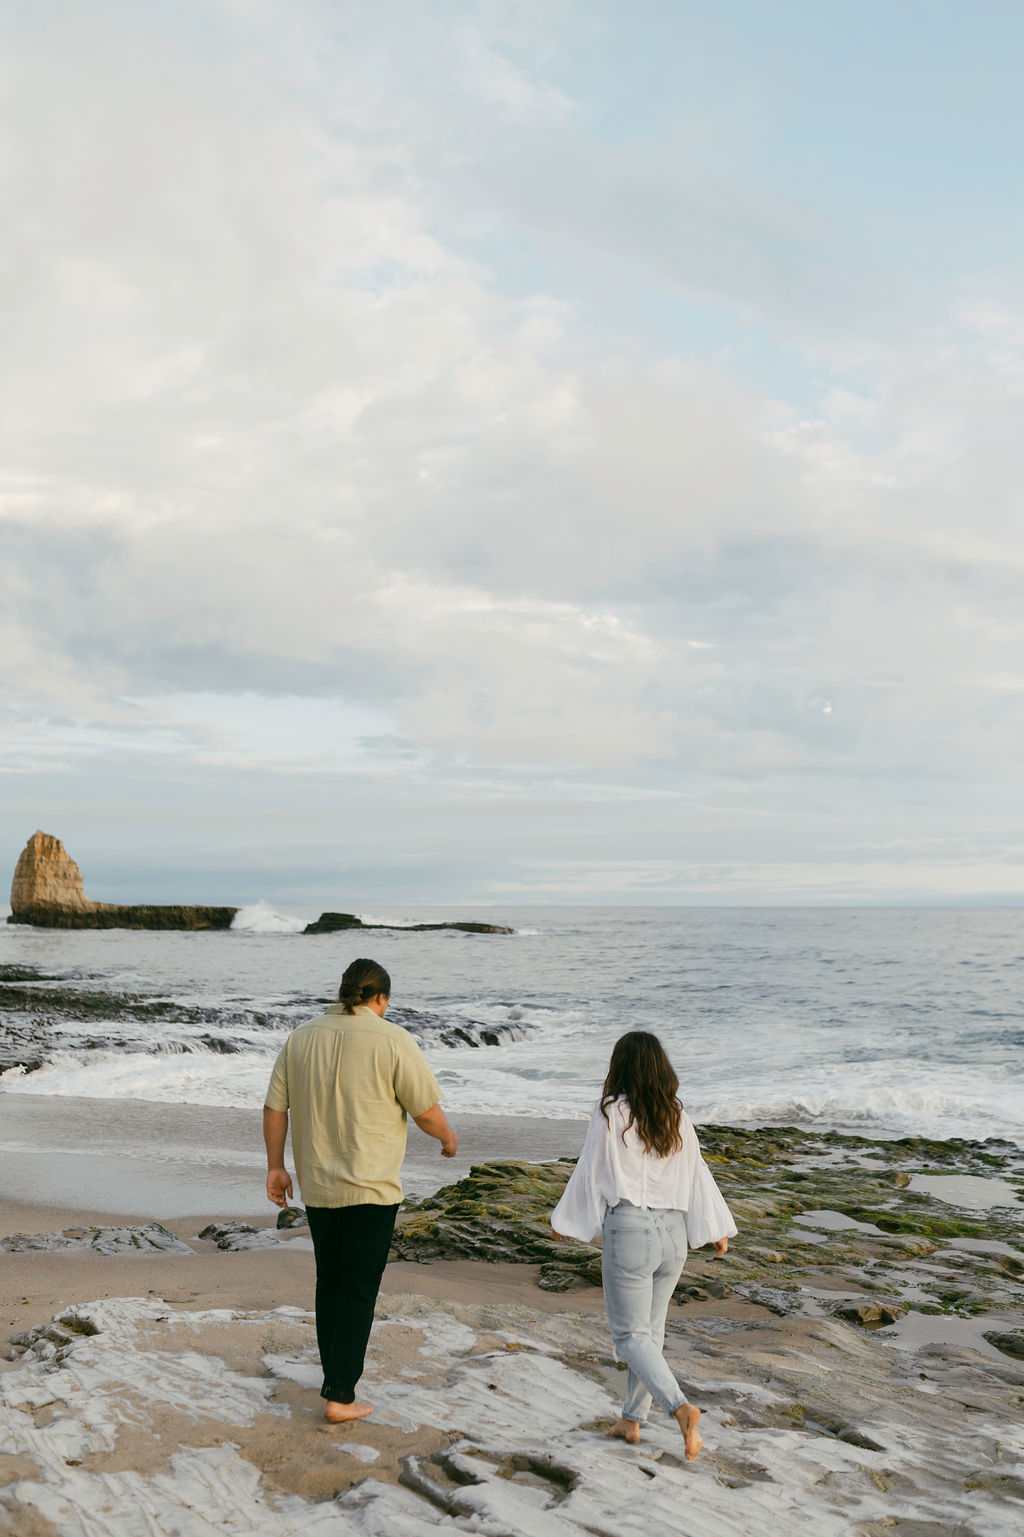 an engagement photoshoot for a newly engaged couple in santa cruz